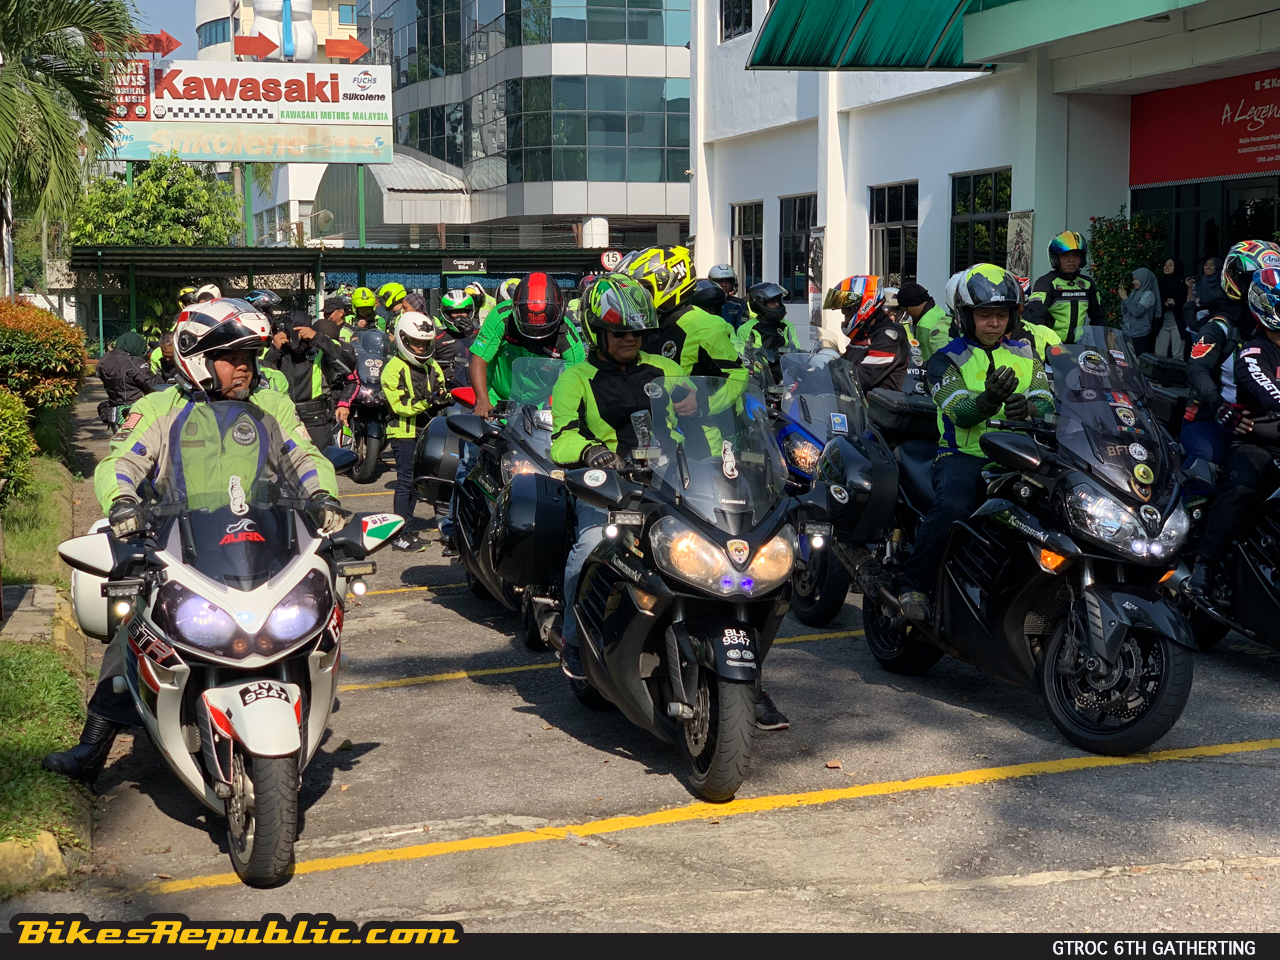 Kawasaki Owner Club (GTROC) 6th Gathering - Motorcycle Motorcycle from Malaysia, Asia and the world - BikesRepublic.com